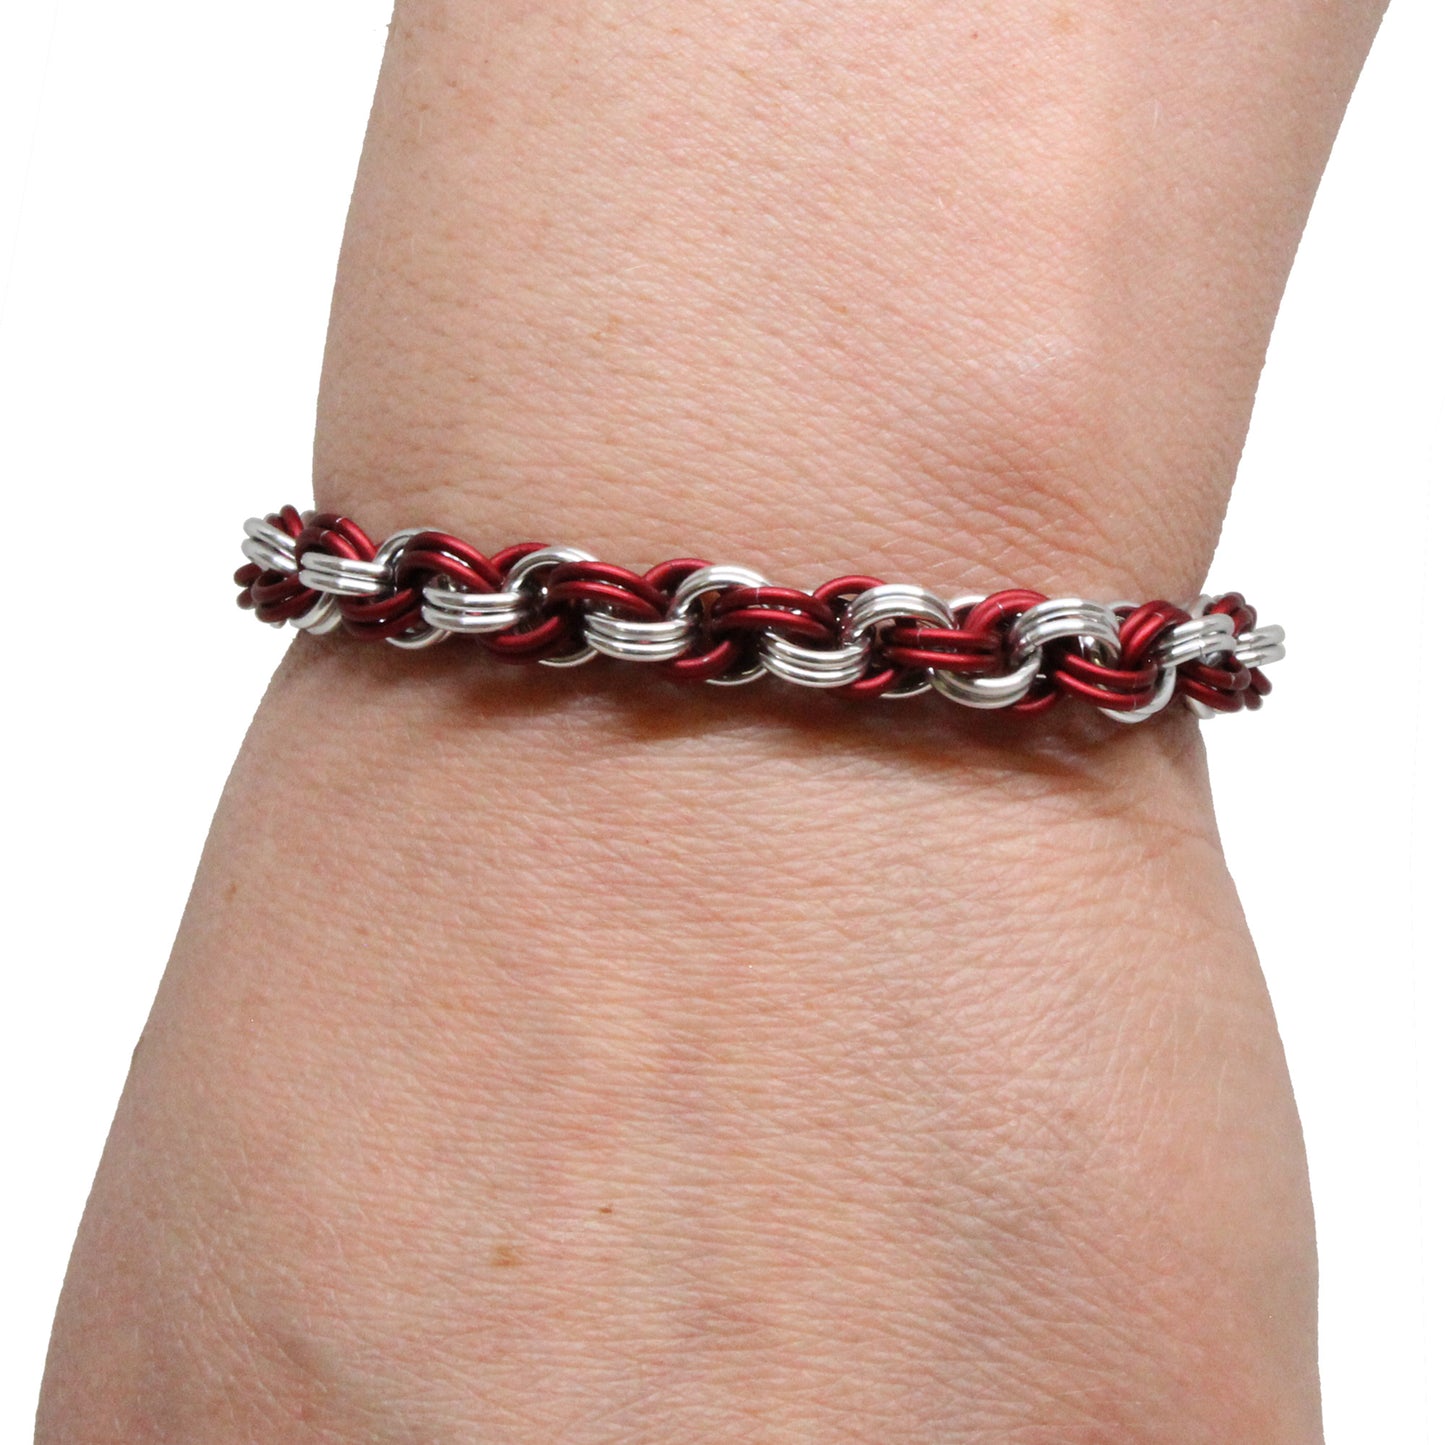 Double Spiral Chainmail Bracelet / matte red and silver / adjustable clasp for 6.5 to 7.5 inch wrist